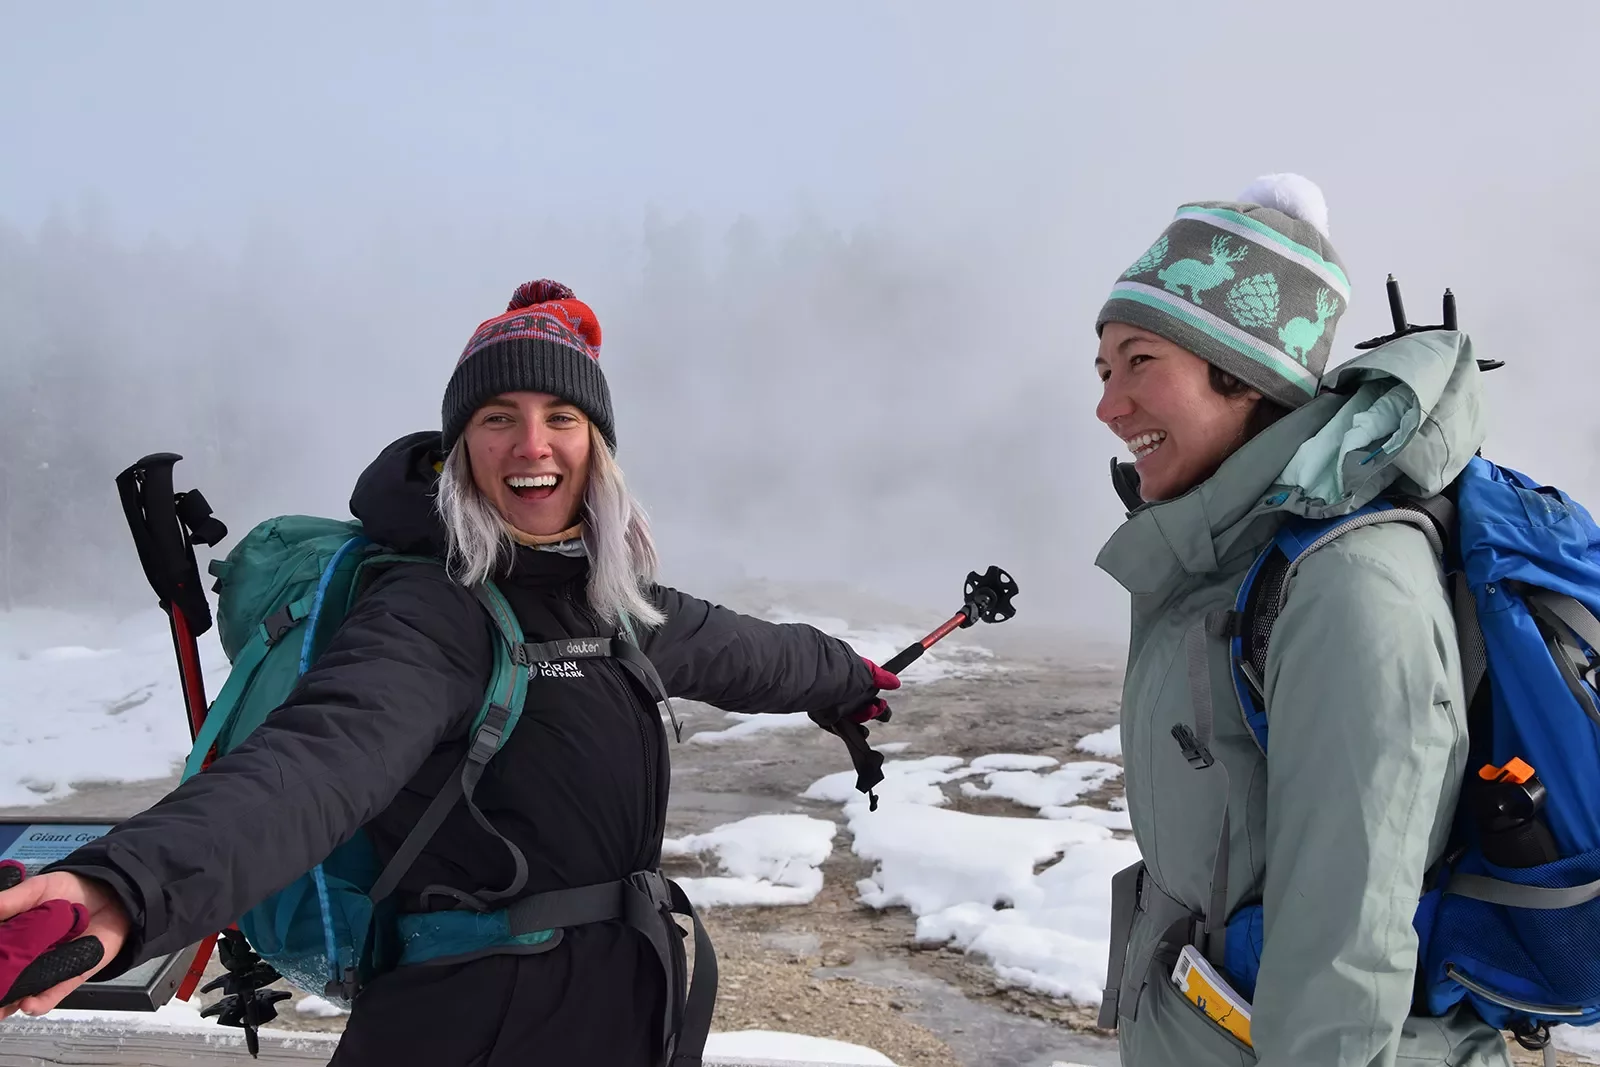 Backroads guests smiling near snowy hot springs